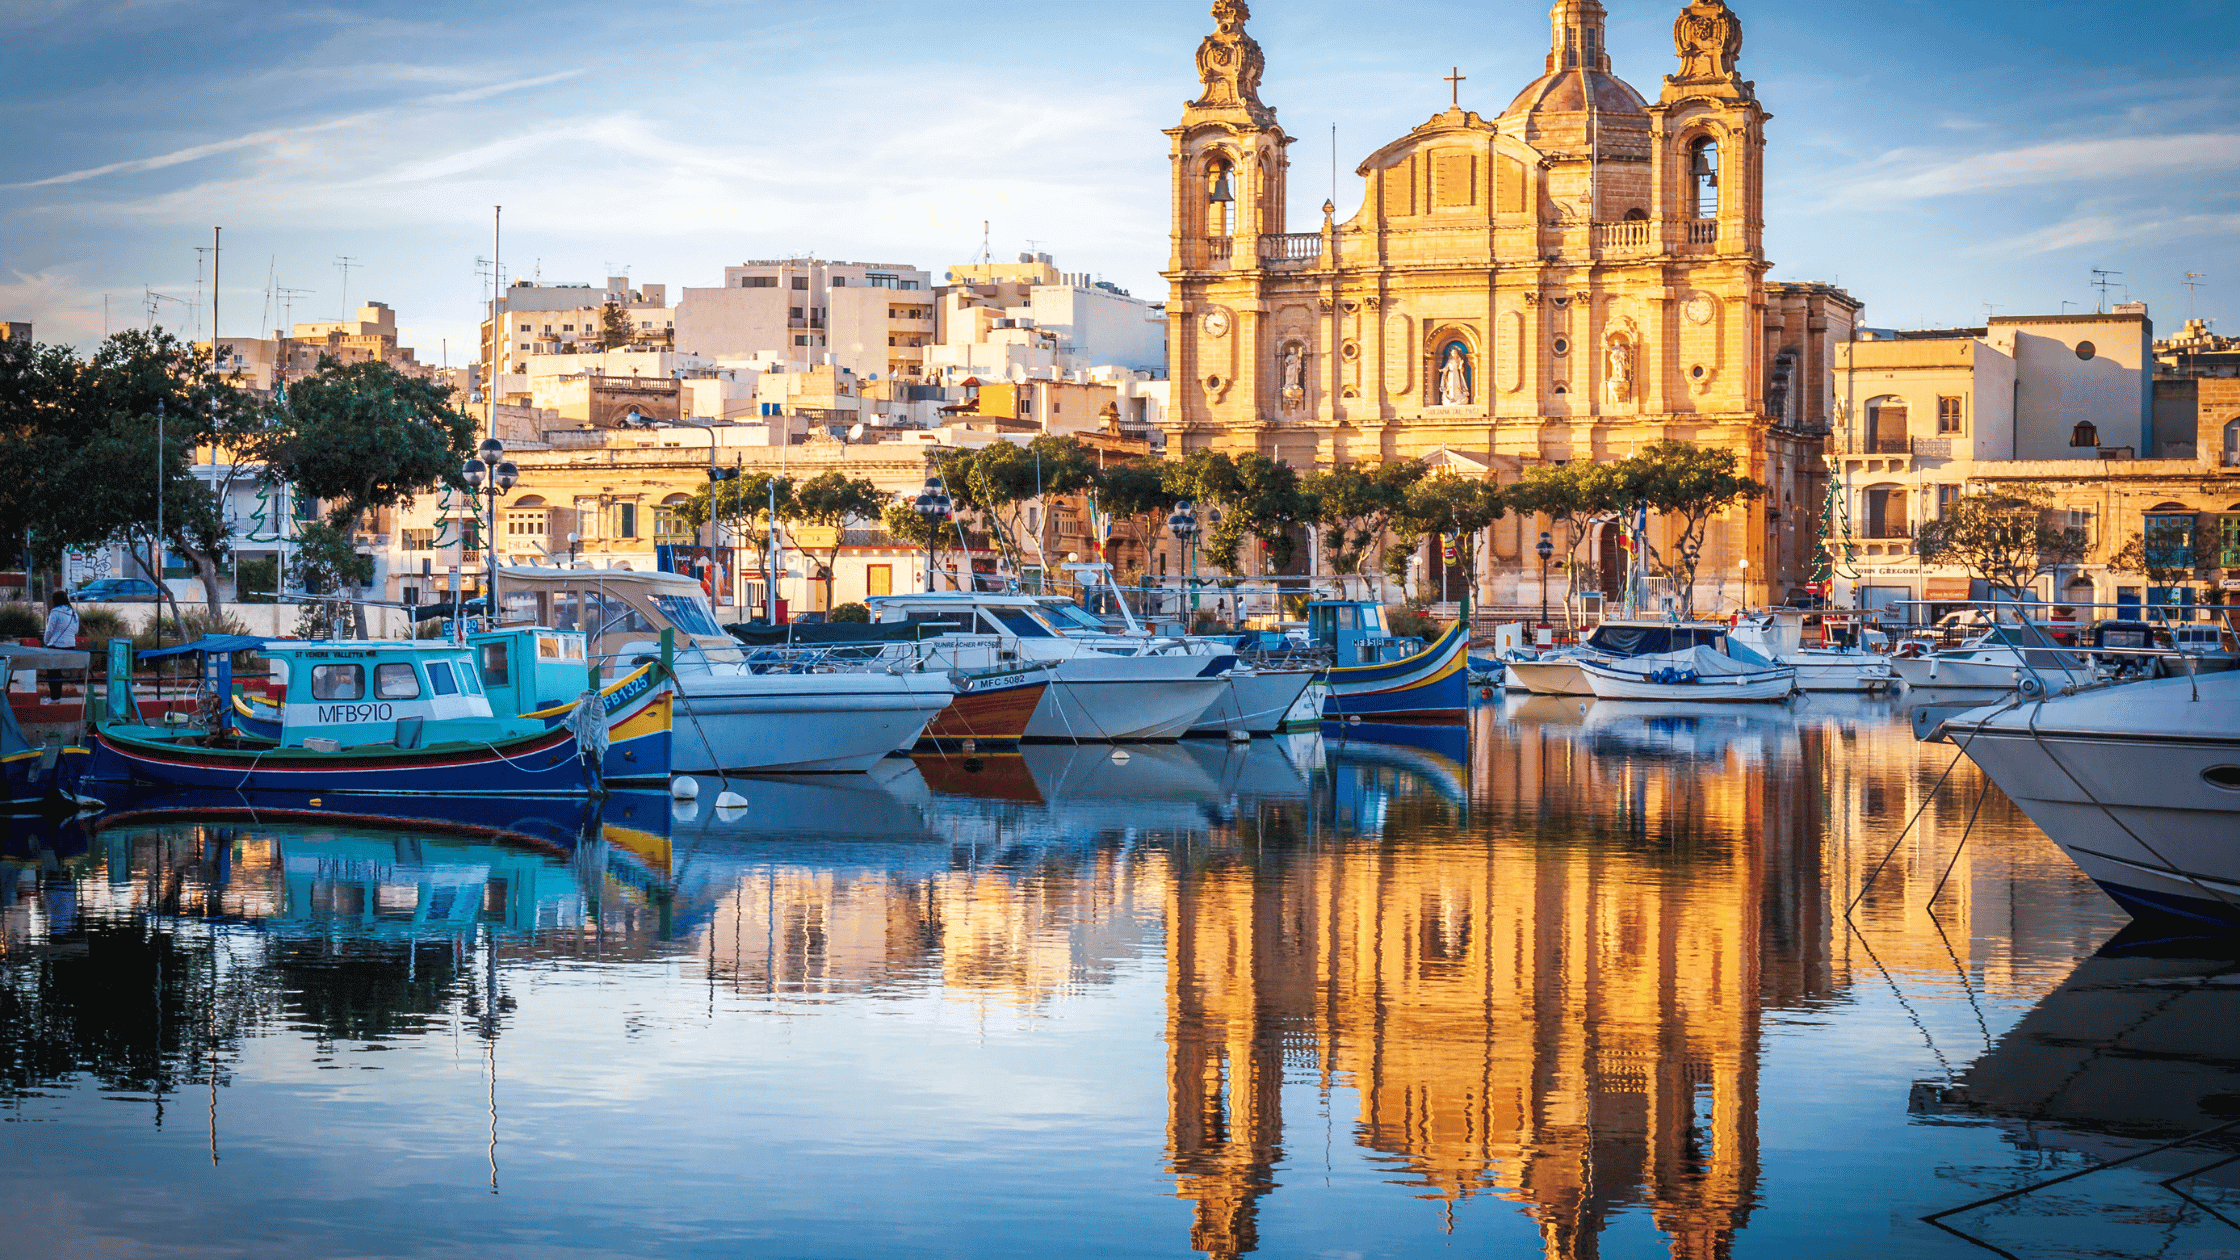 discover Malta: Boats in the heart of the city